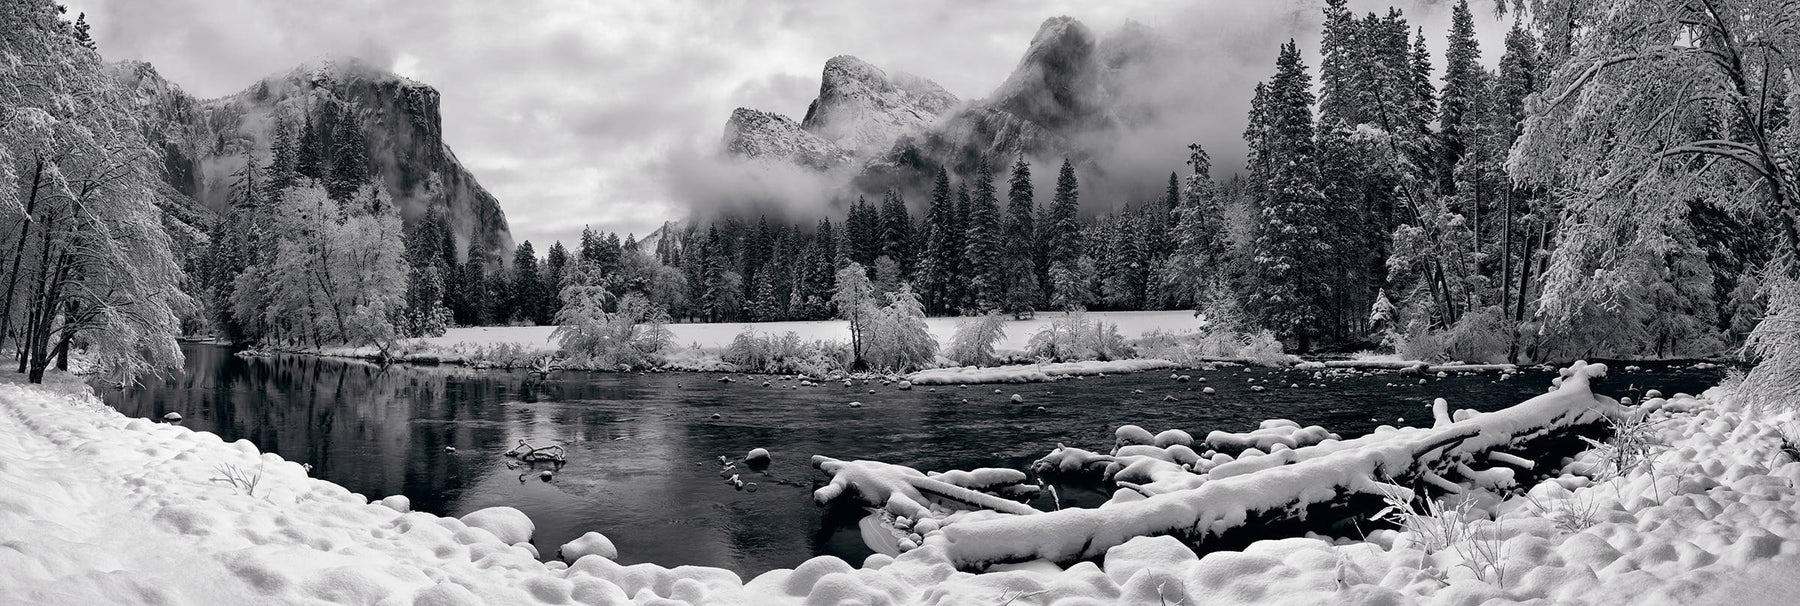 Black and white river running through the snow covered Yosemite Valley with El Capitan mountain in the background 